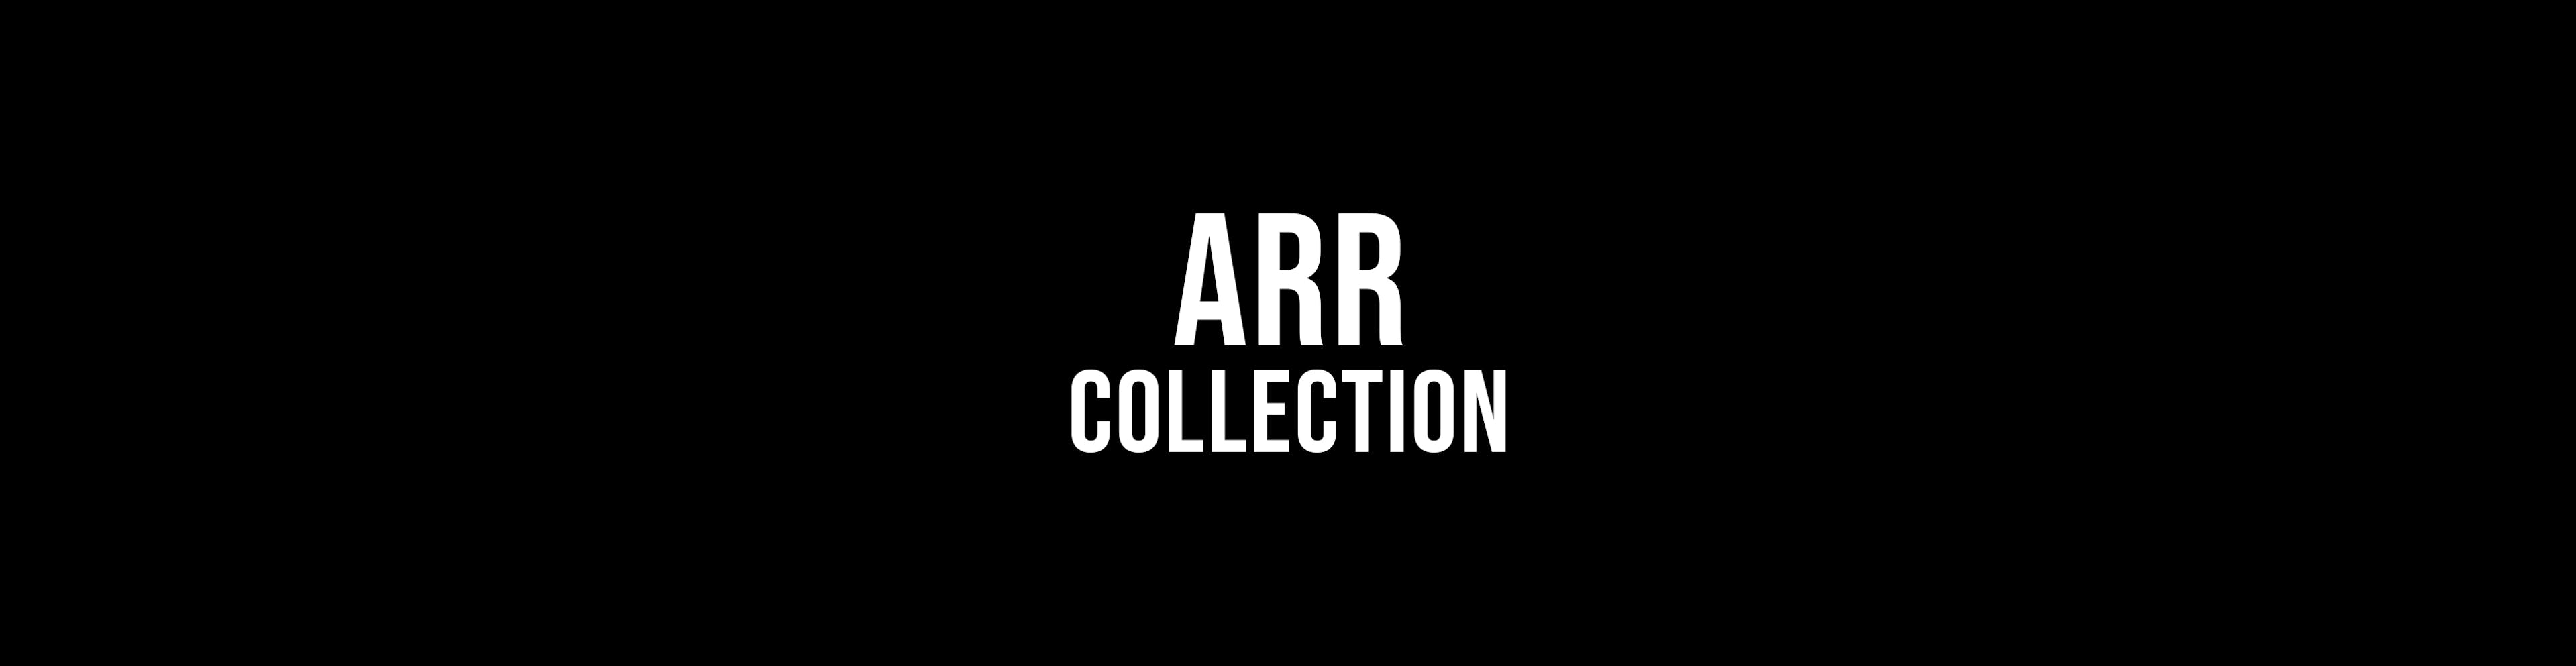 ARR Collection